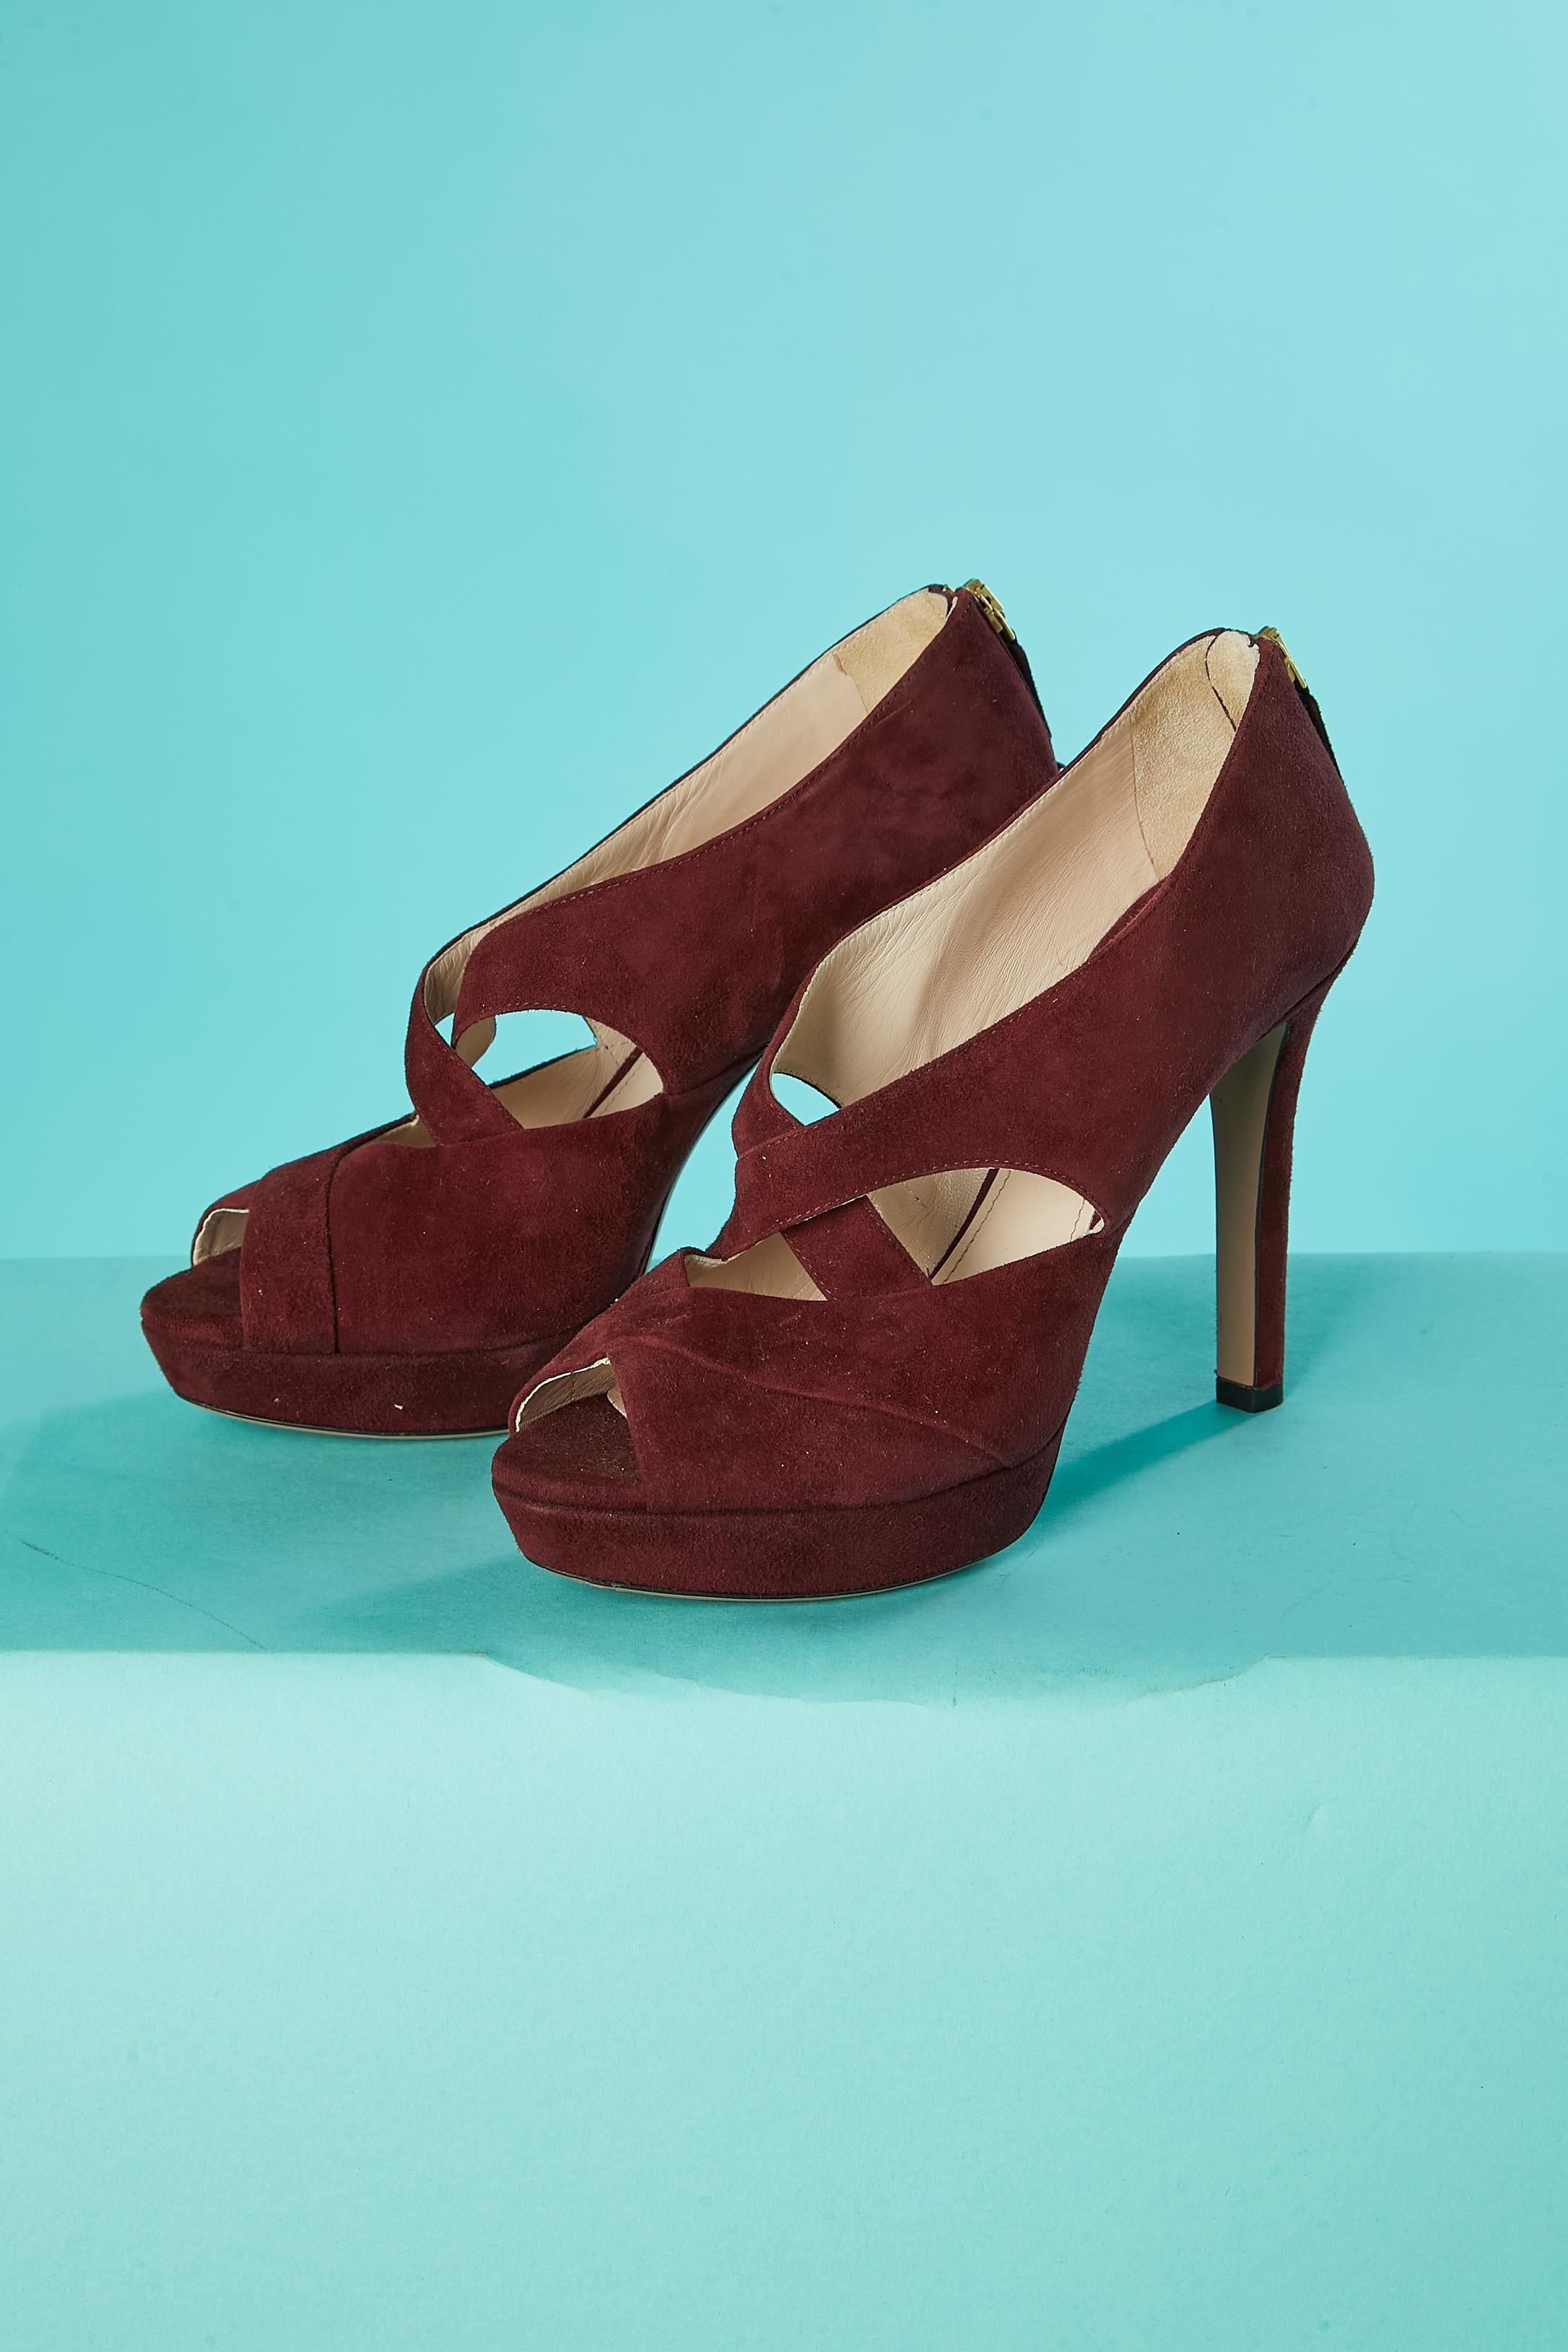 High heels sandals in burgundy suede with cut-work . Zip on the top middle back.
Heel height : 11,5 cm
plateform : 2,5 cm 
SHOE SIZE : 39 